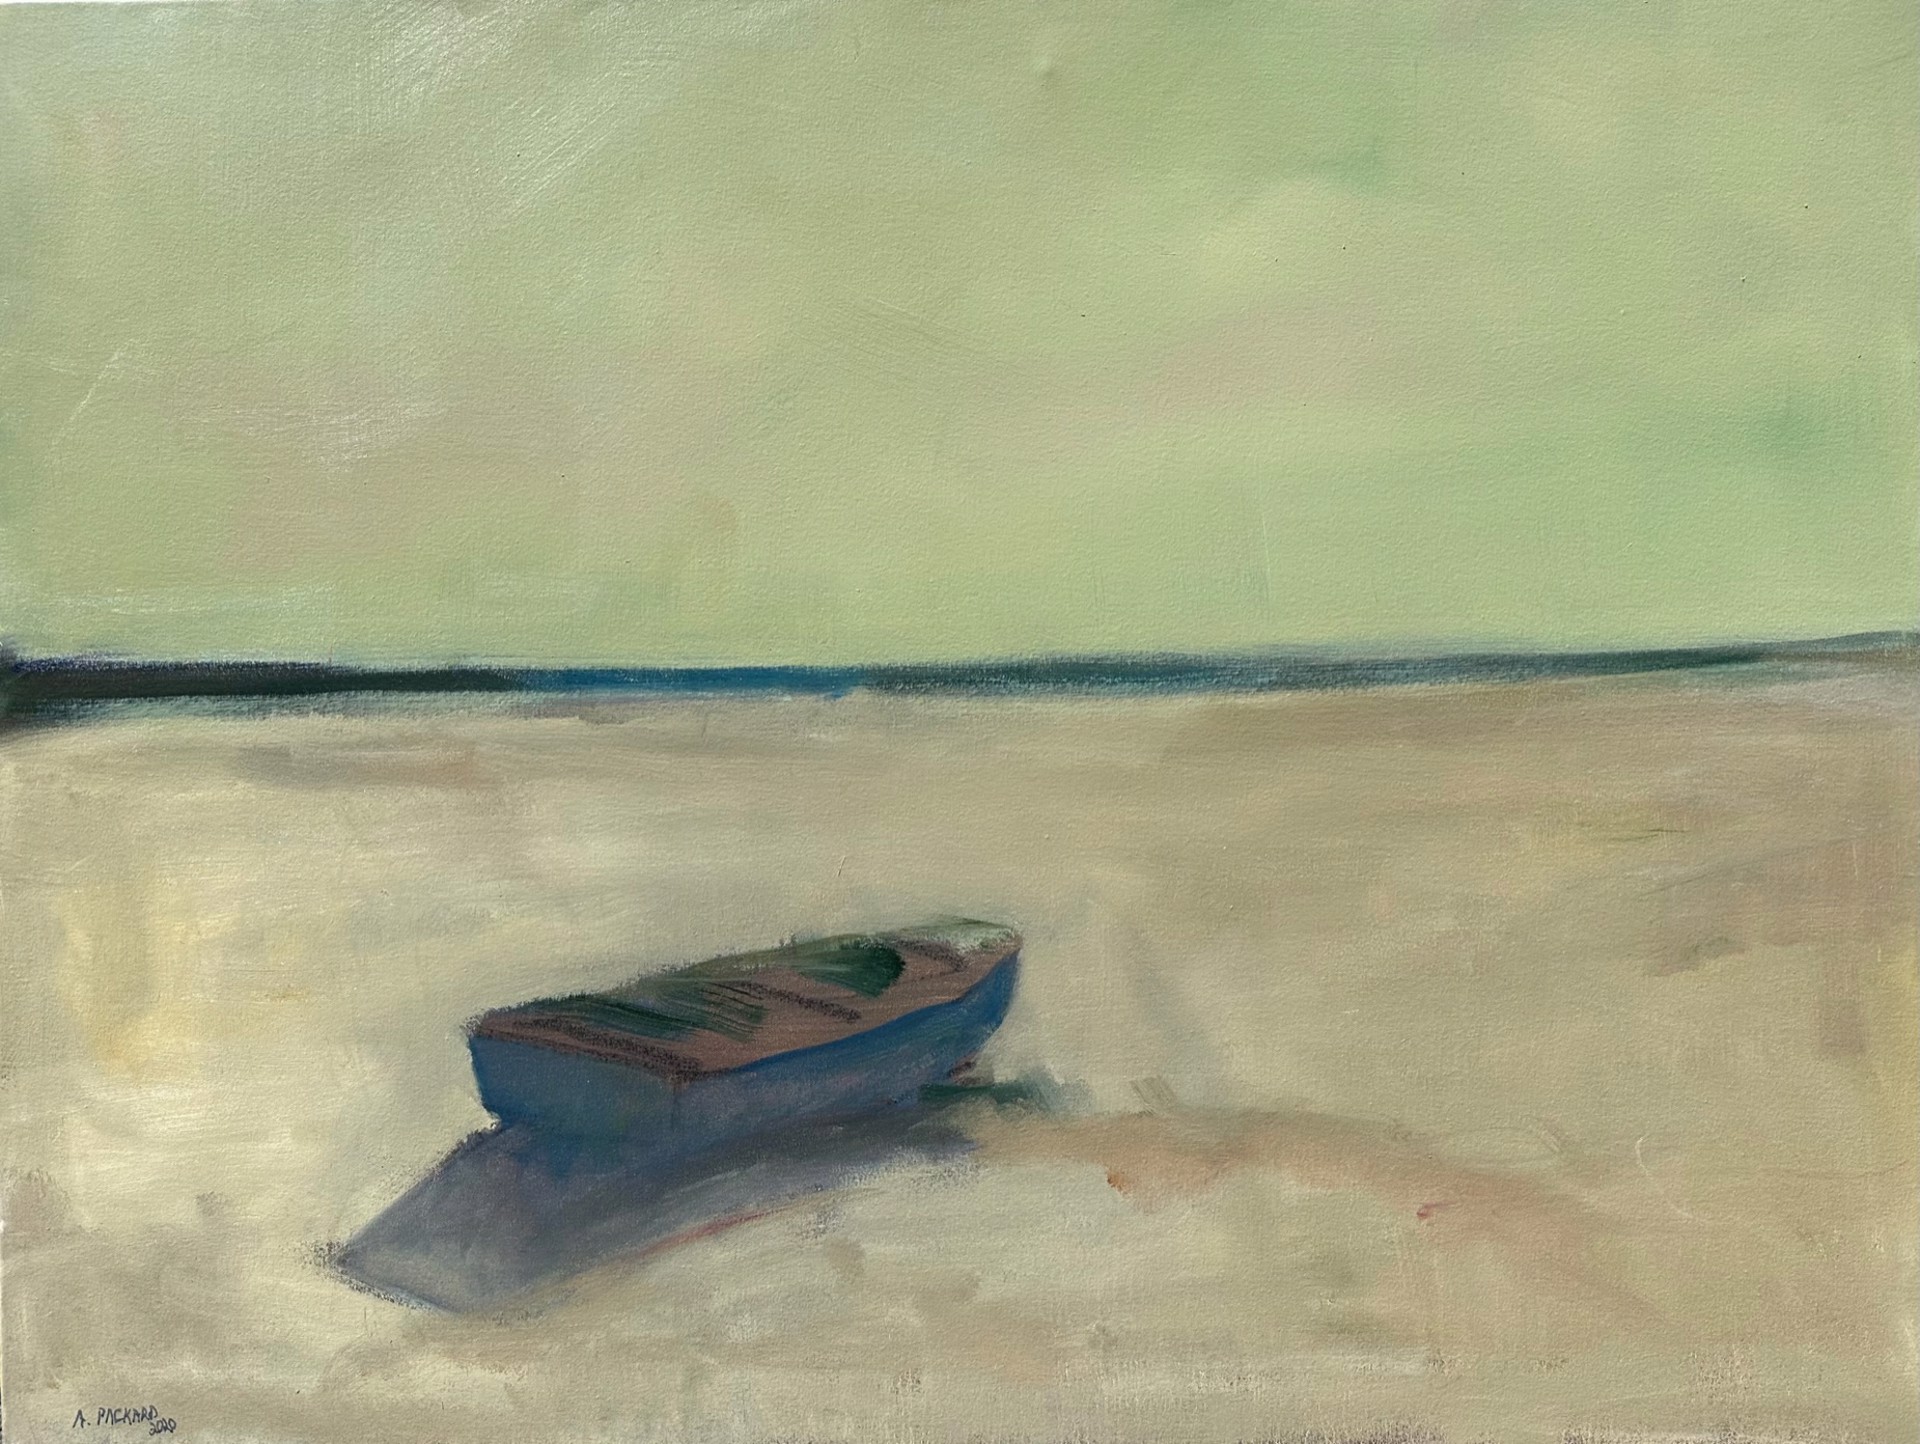 Colors of the Shore by Anne Packard